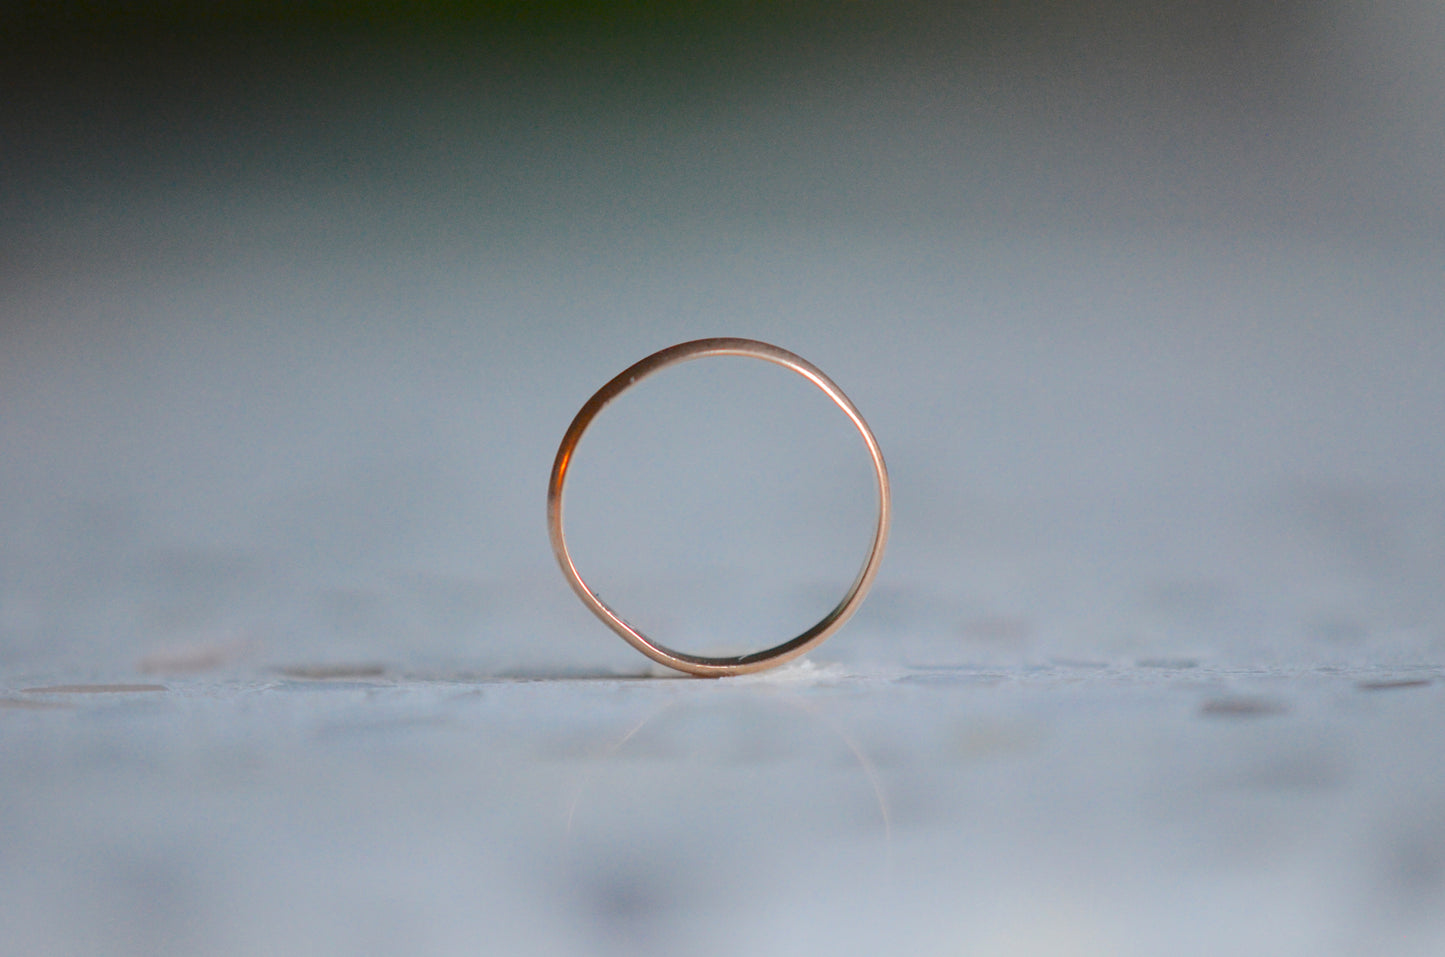 Simple and Classic Pinky/Midi Ring